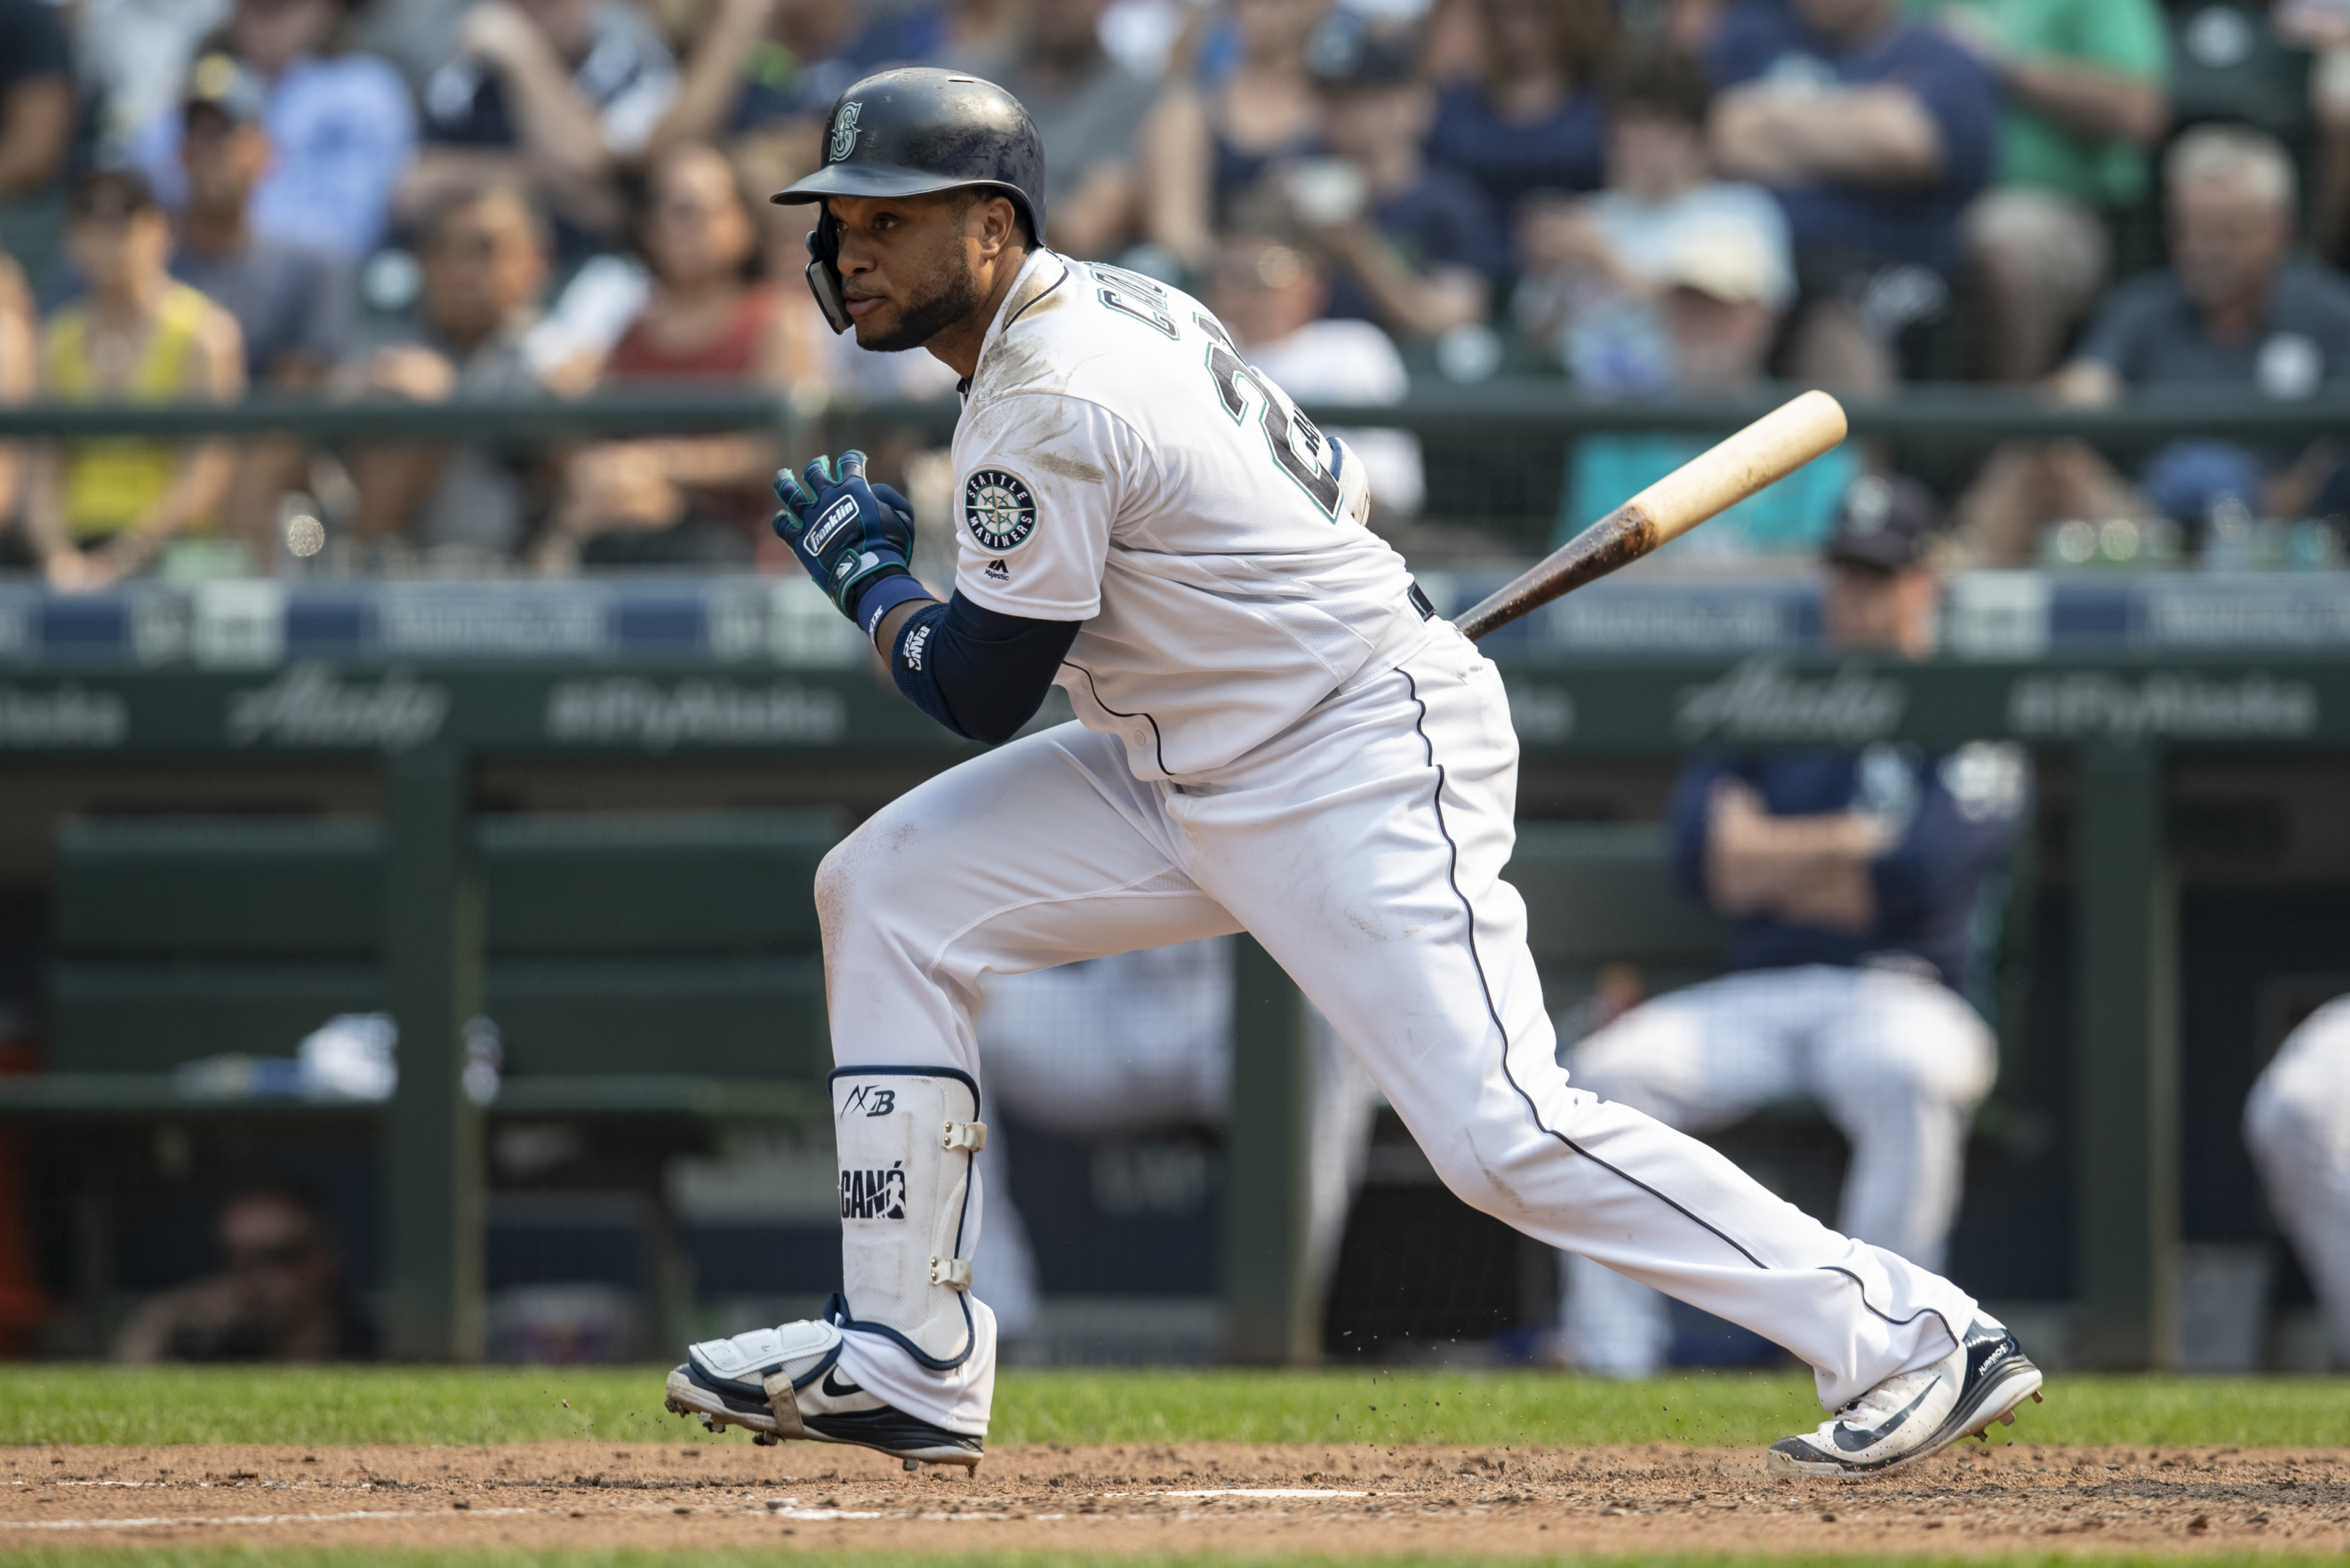 New York Mets: Robinson Cano, the Universal DH and the Future